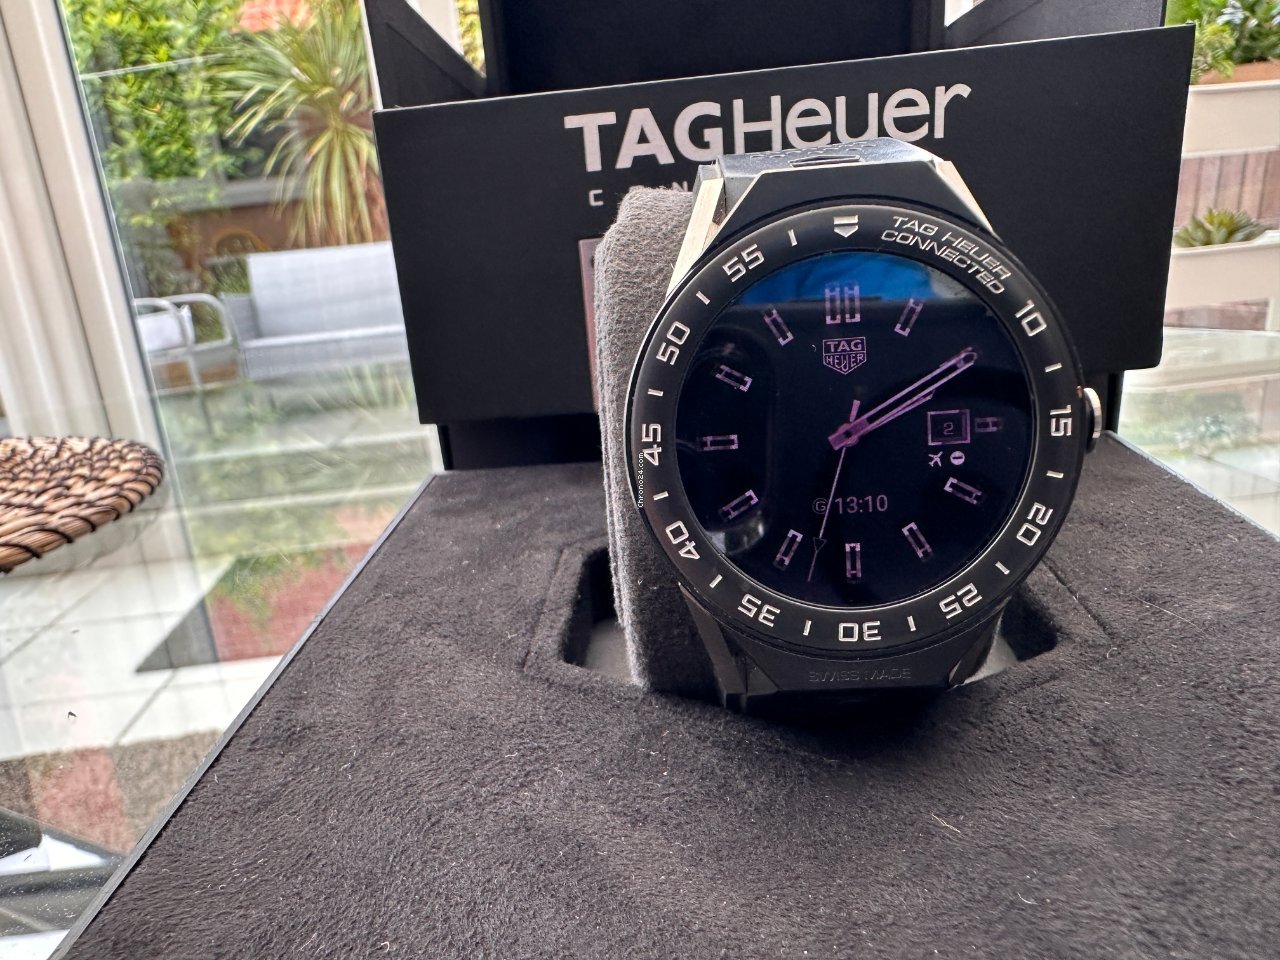 look-like-a-kingsman-agent-wearing-this-3650-tag-heuer-smartwatch